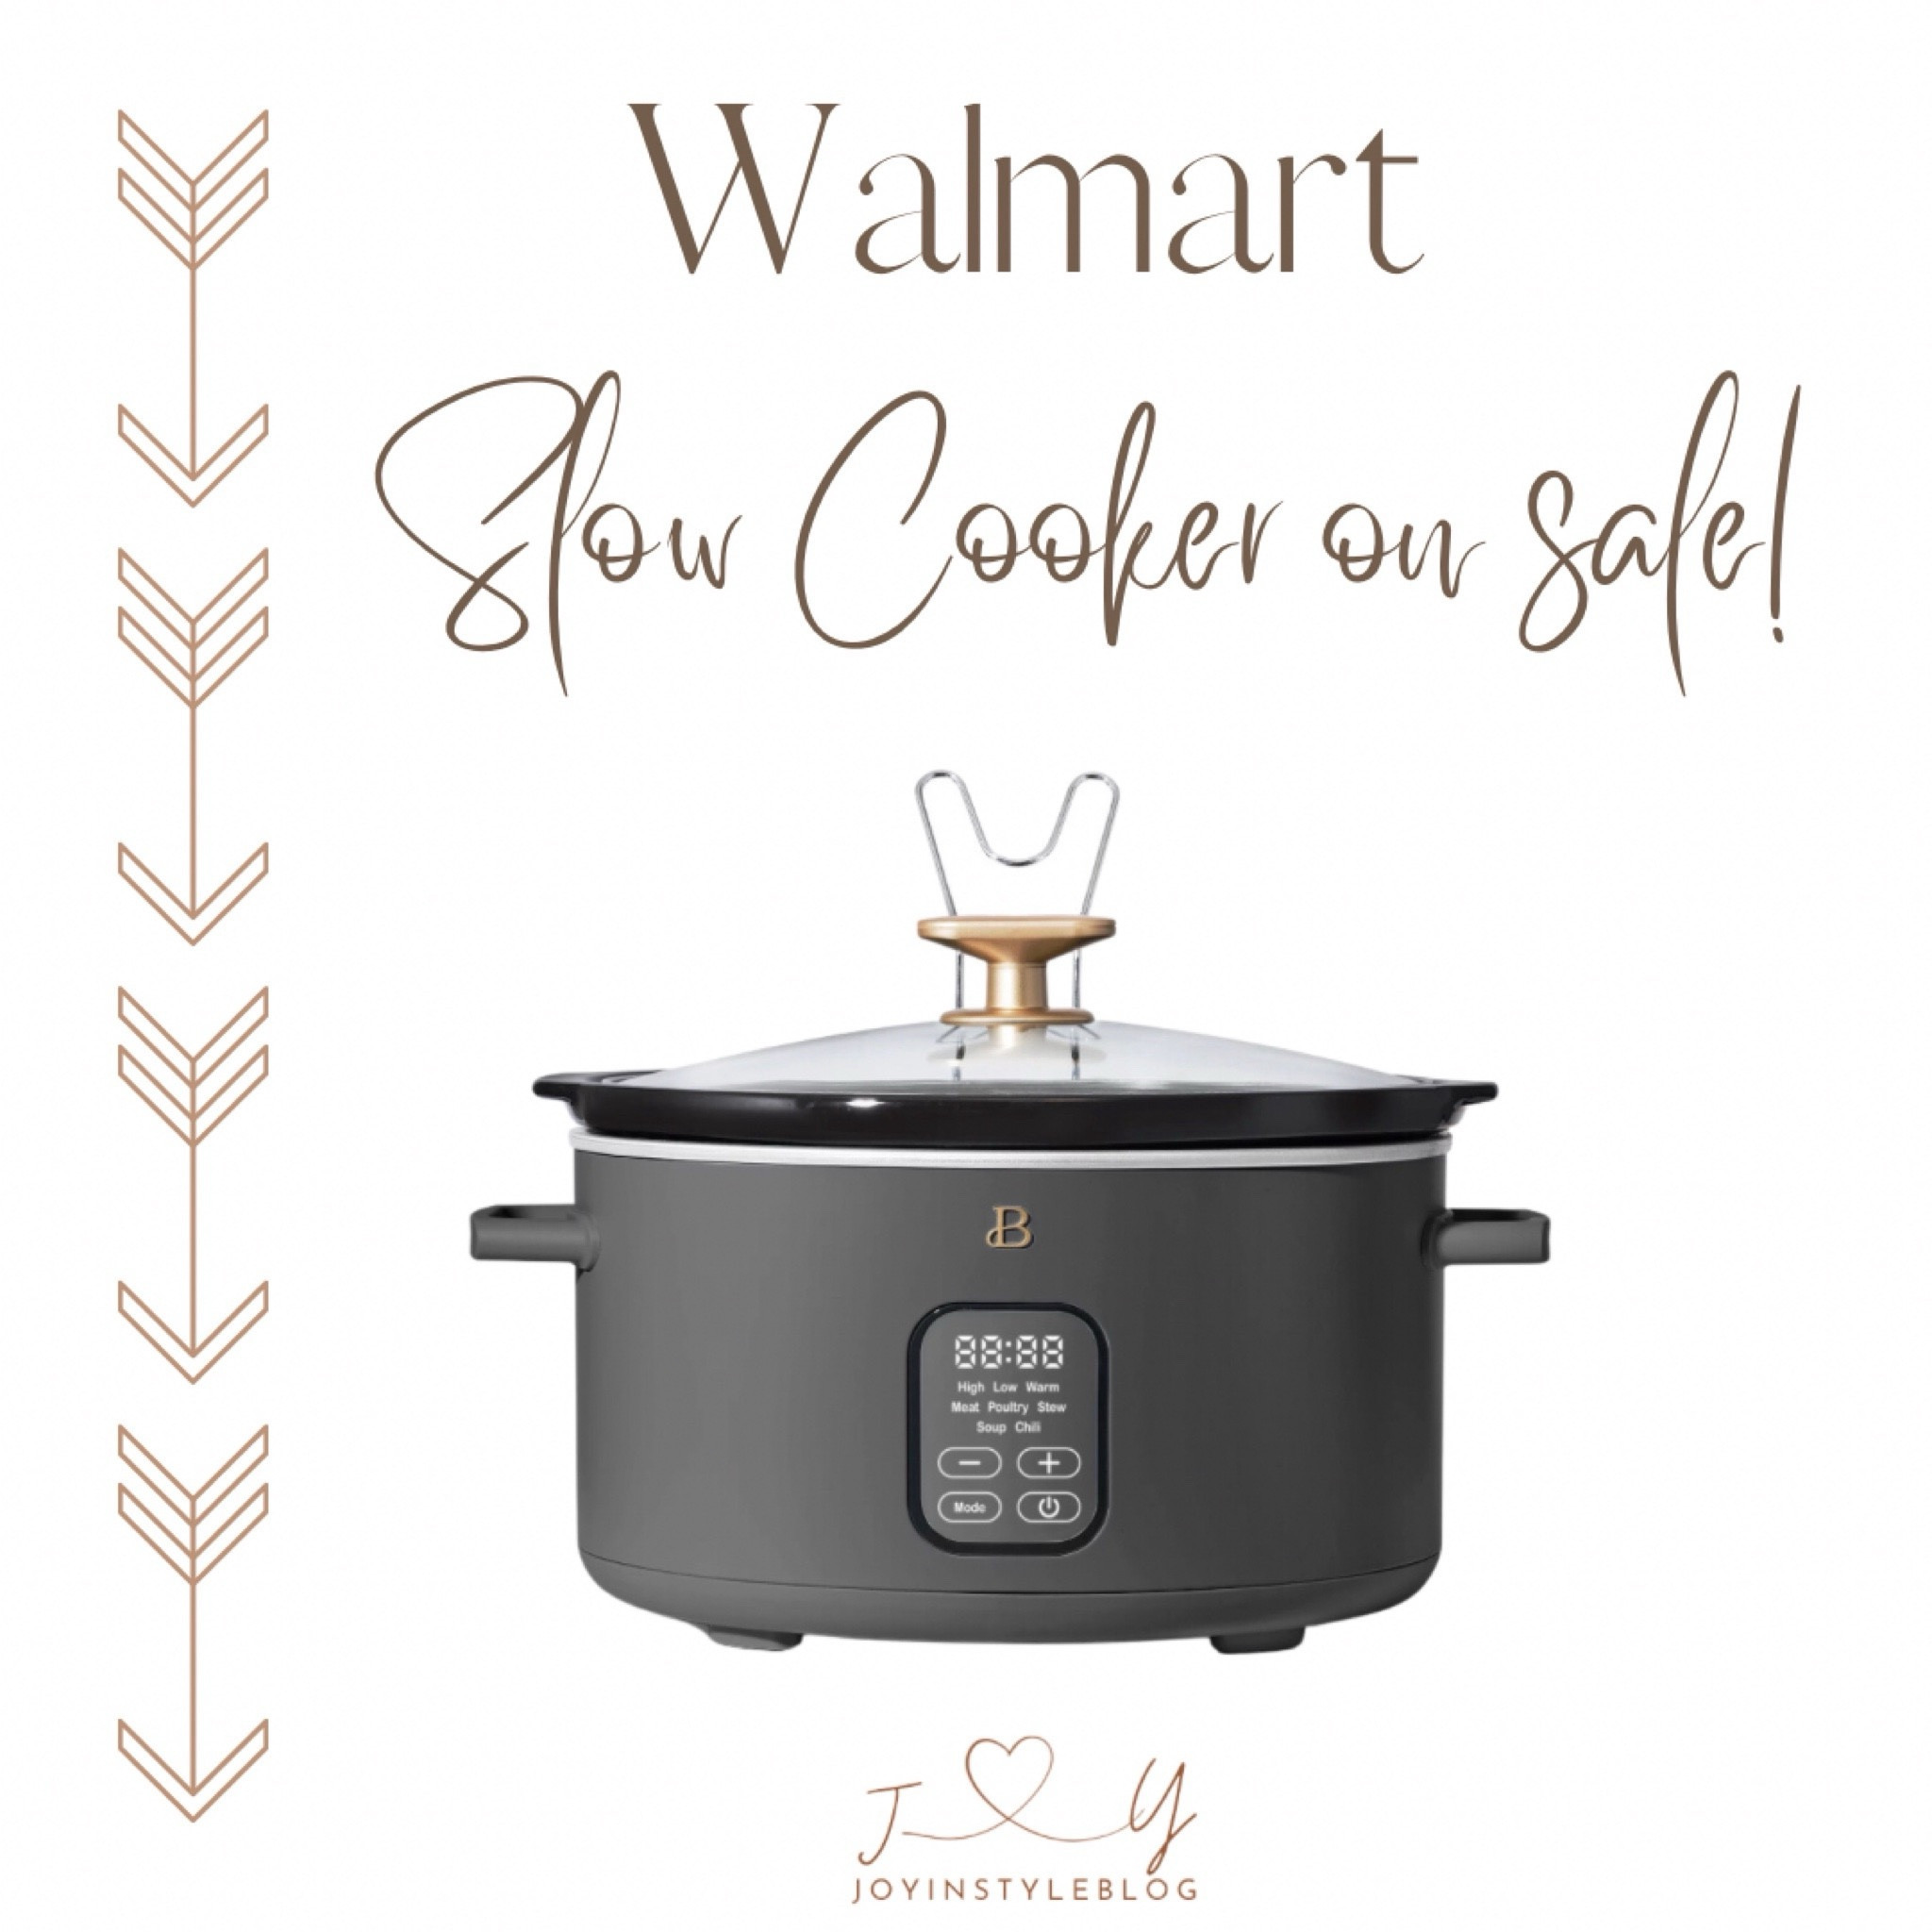 Beautiful 6 Qt Programmable Slow Cooker, Oyster Grey by Drew Barrymore 